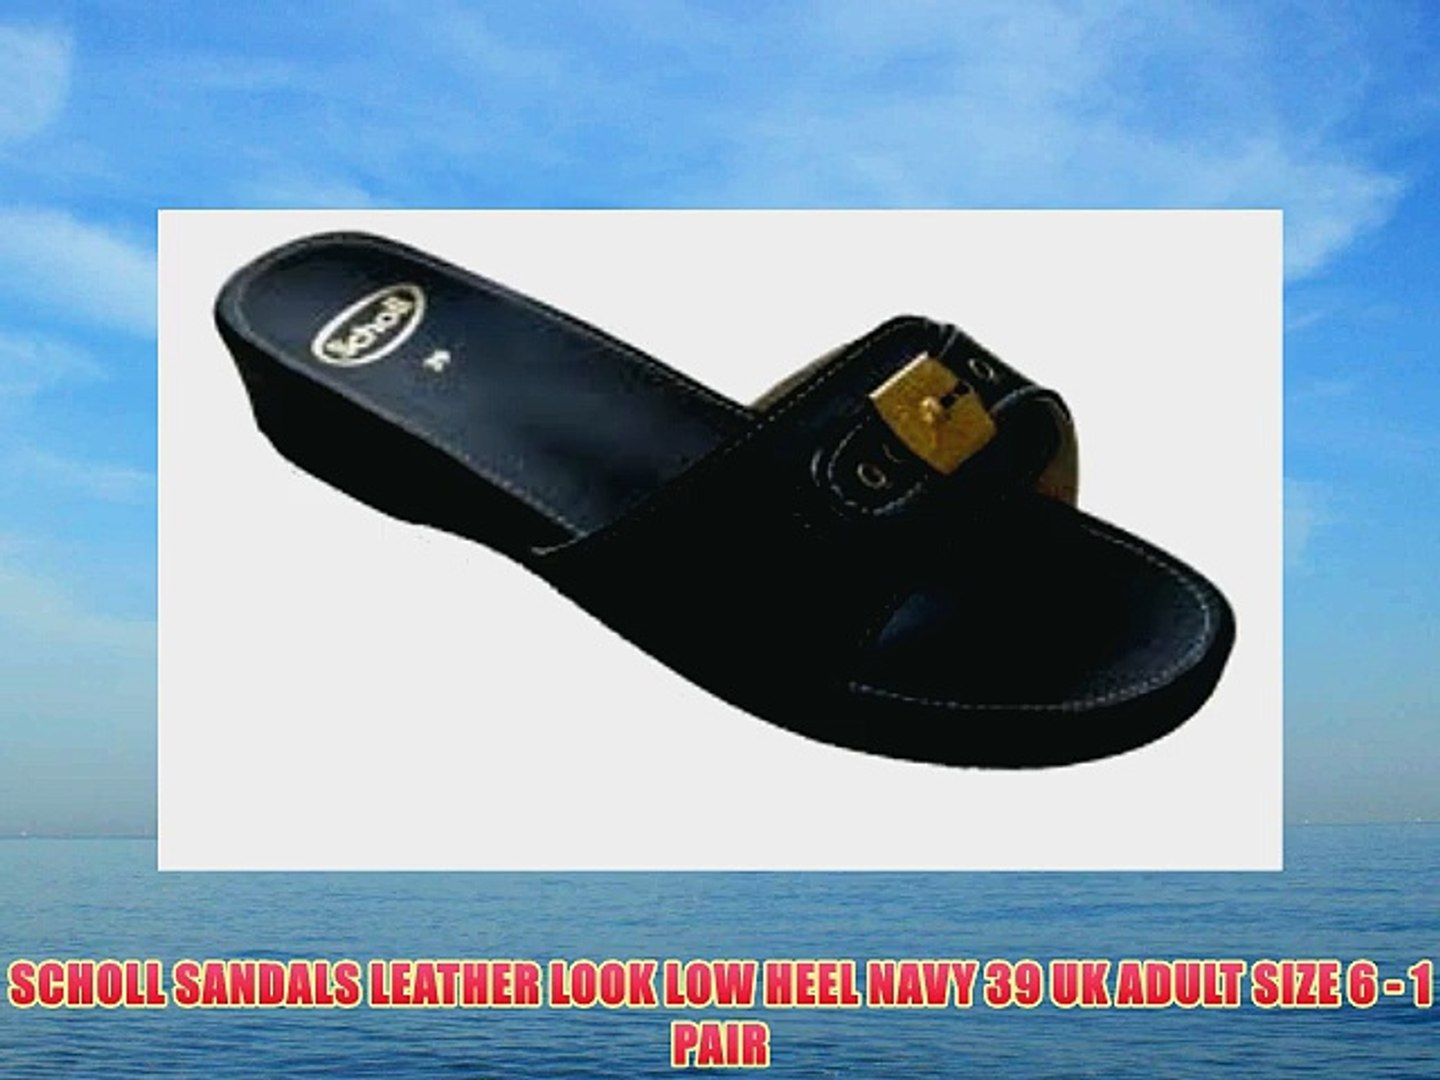 SCHOLL SANDALS LEATHER LOOK LOW HEEL NAVY 39 UK ADULT SIZE 6 - 1 PAIR -  video Dailymotion